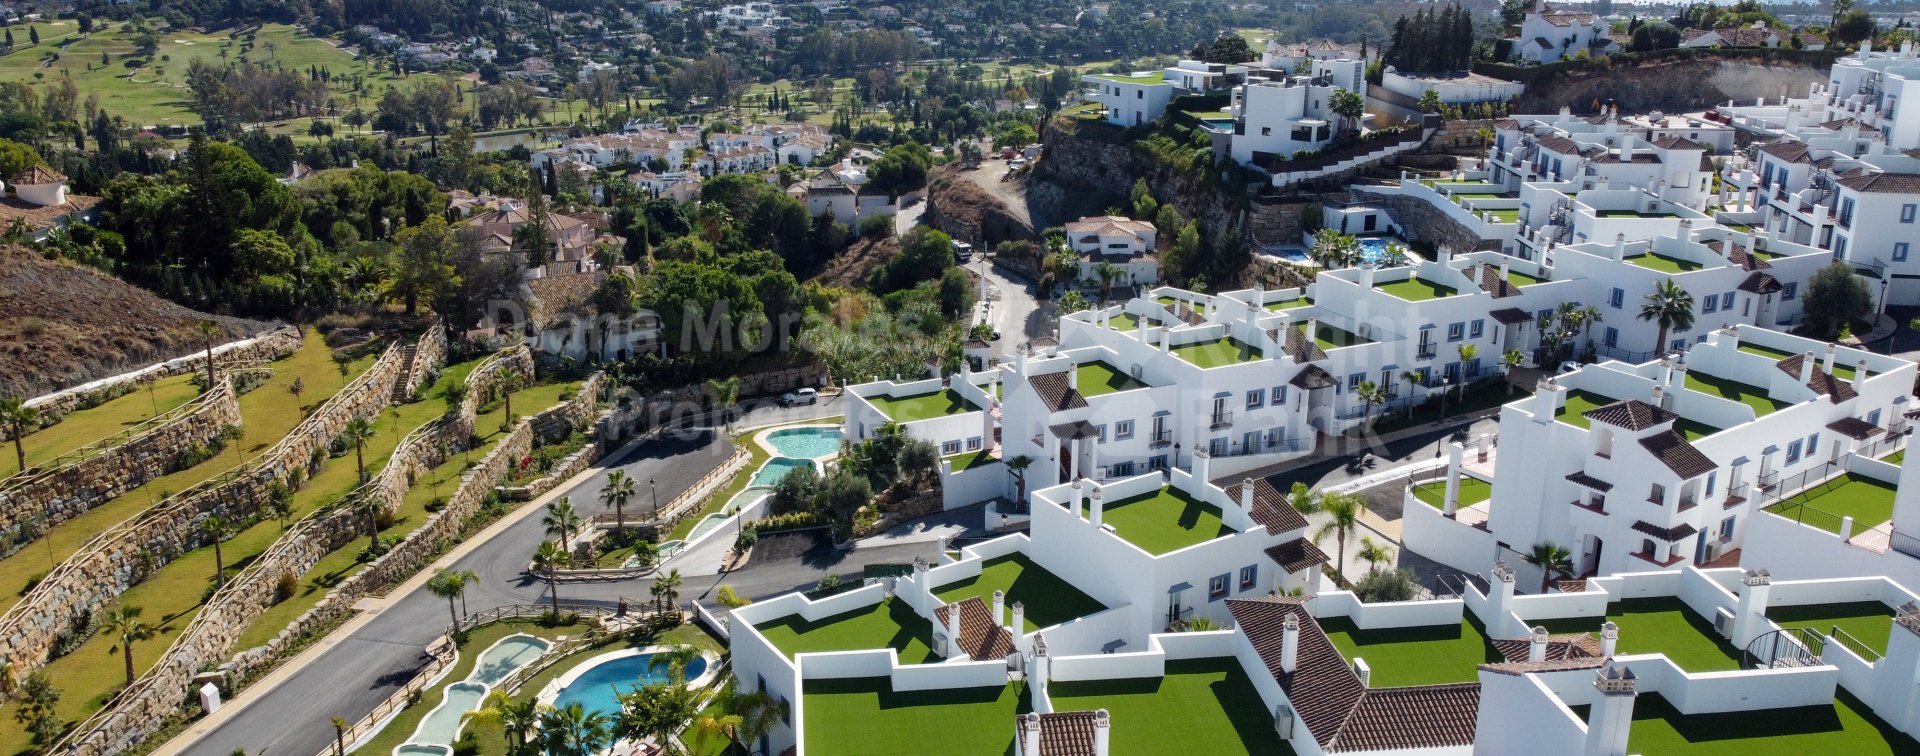 Paraiso Pueblo, Andalusian white village apartments with wide range of amenities